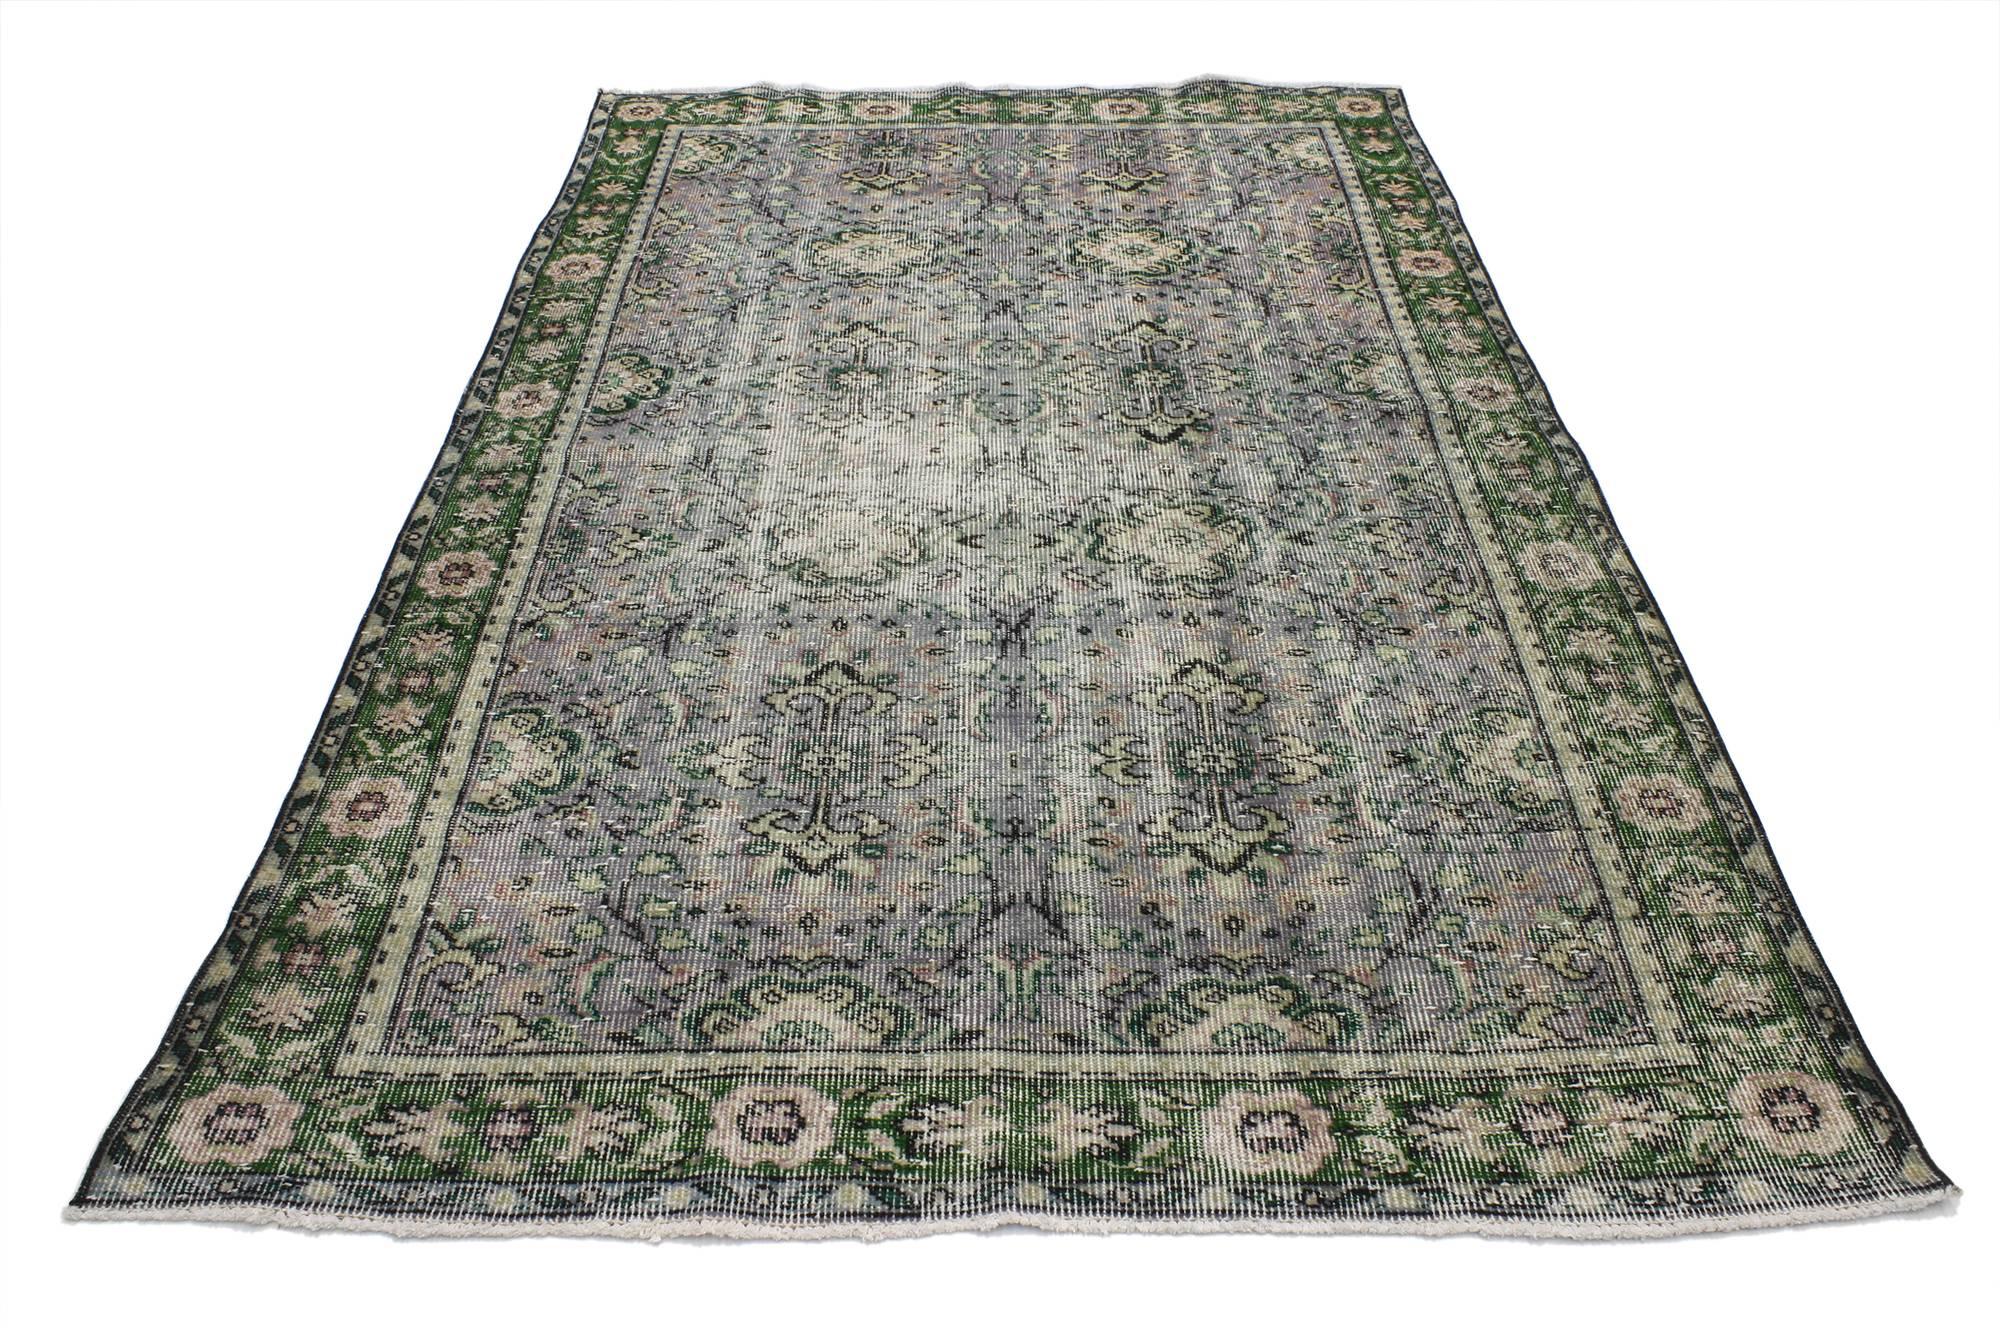 51991, distressed vintage Turkish Sivas rug with Industrial style. Age-worn with shorn pile, this hand-knotted wool distressed vintage Sivas rug features the distressed look so popular with Industrial style interiors. Rustic and time-softened, this